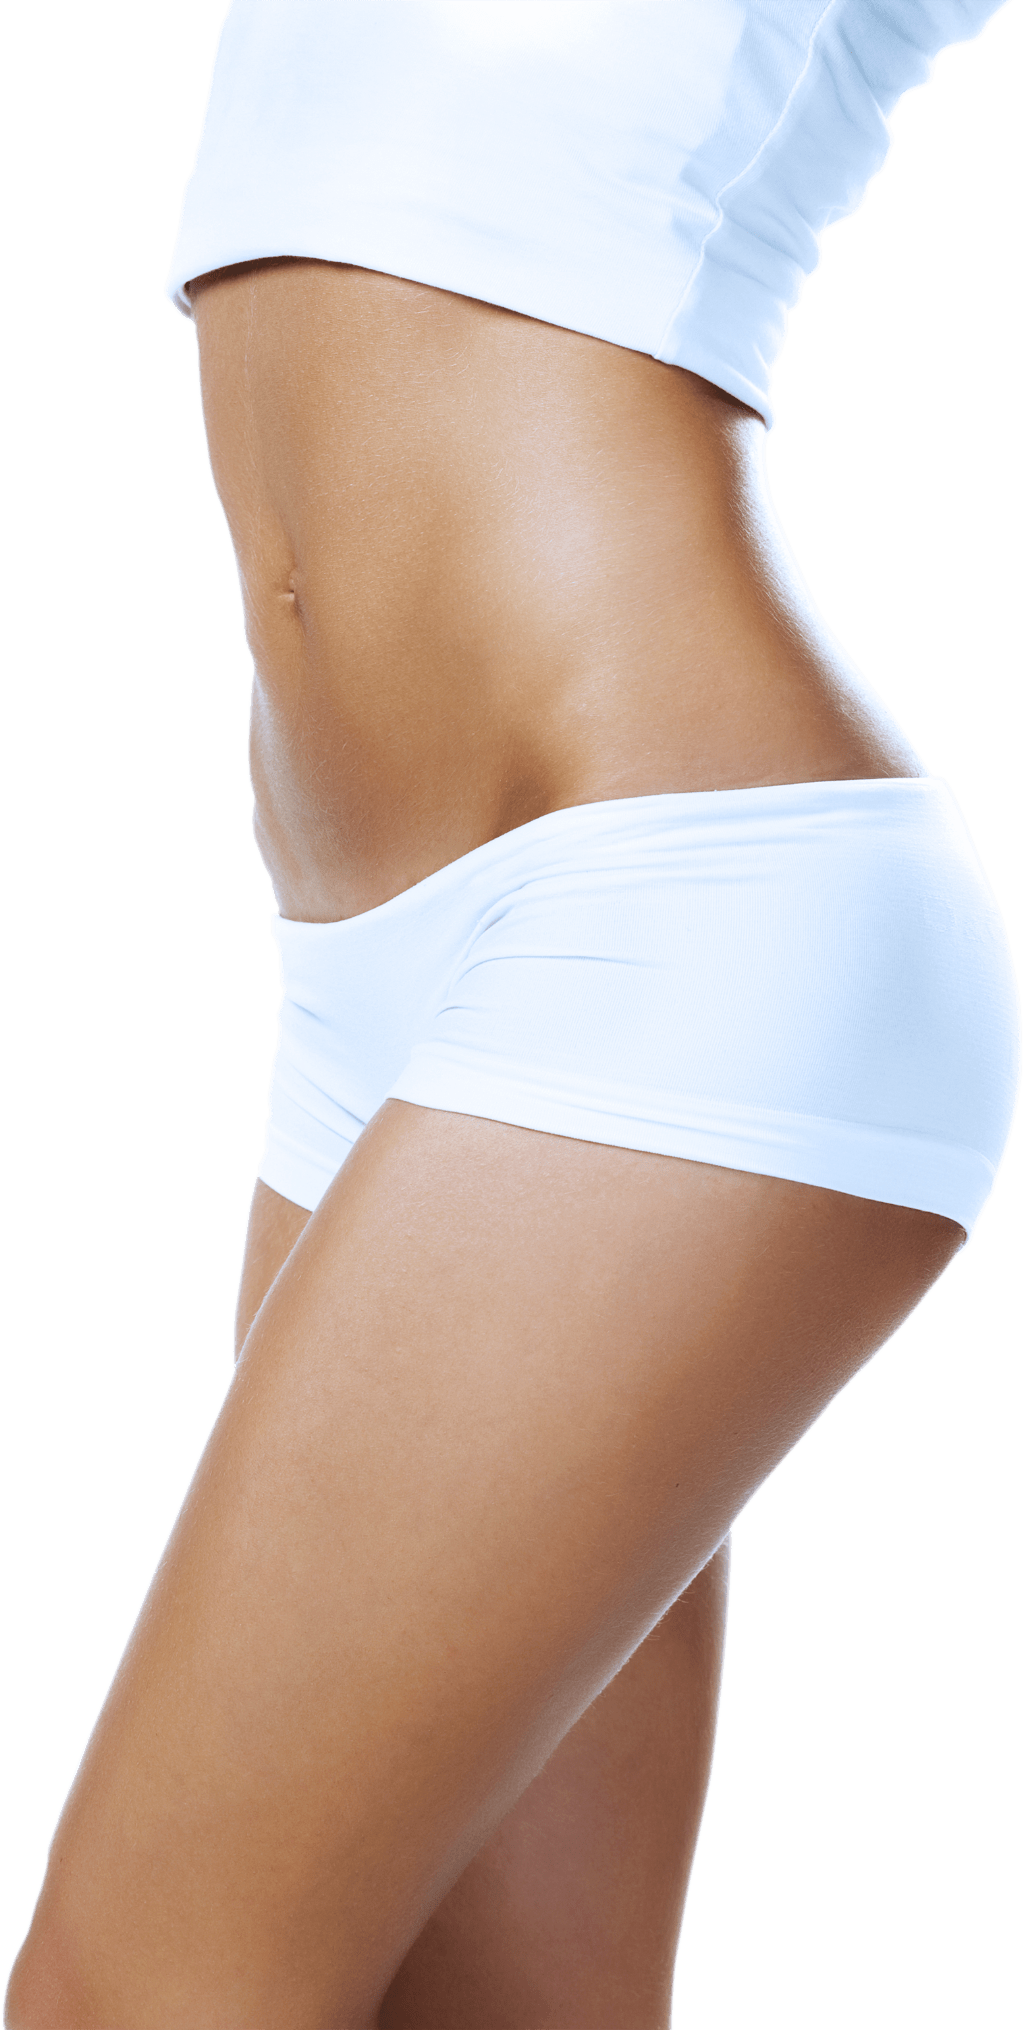 Flat stomach with CoolSculpting Fat Freezing in Rosemount, MN